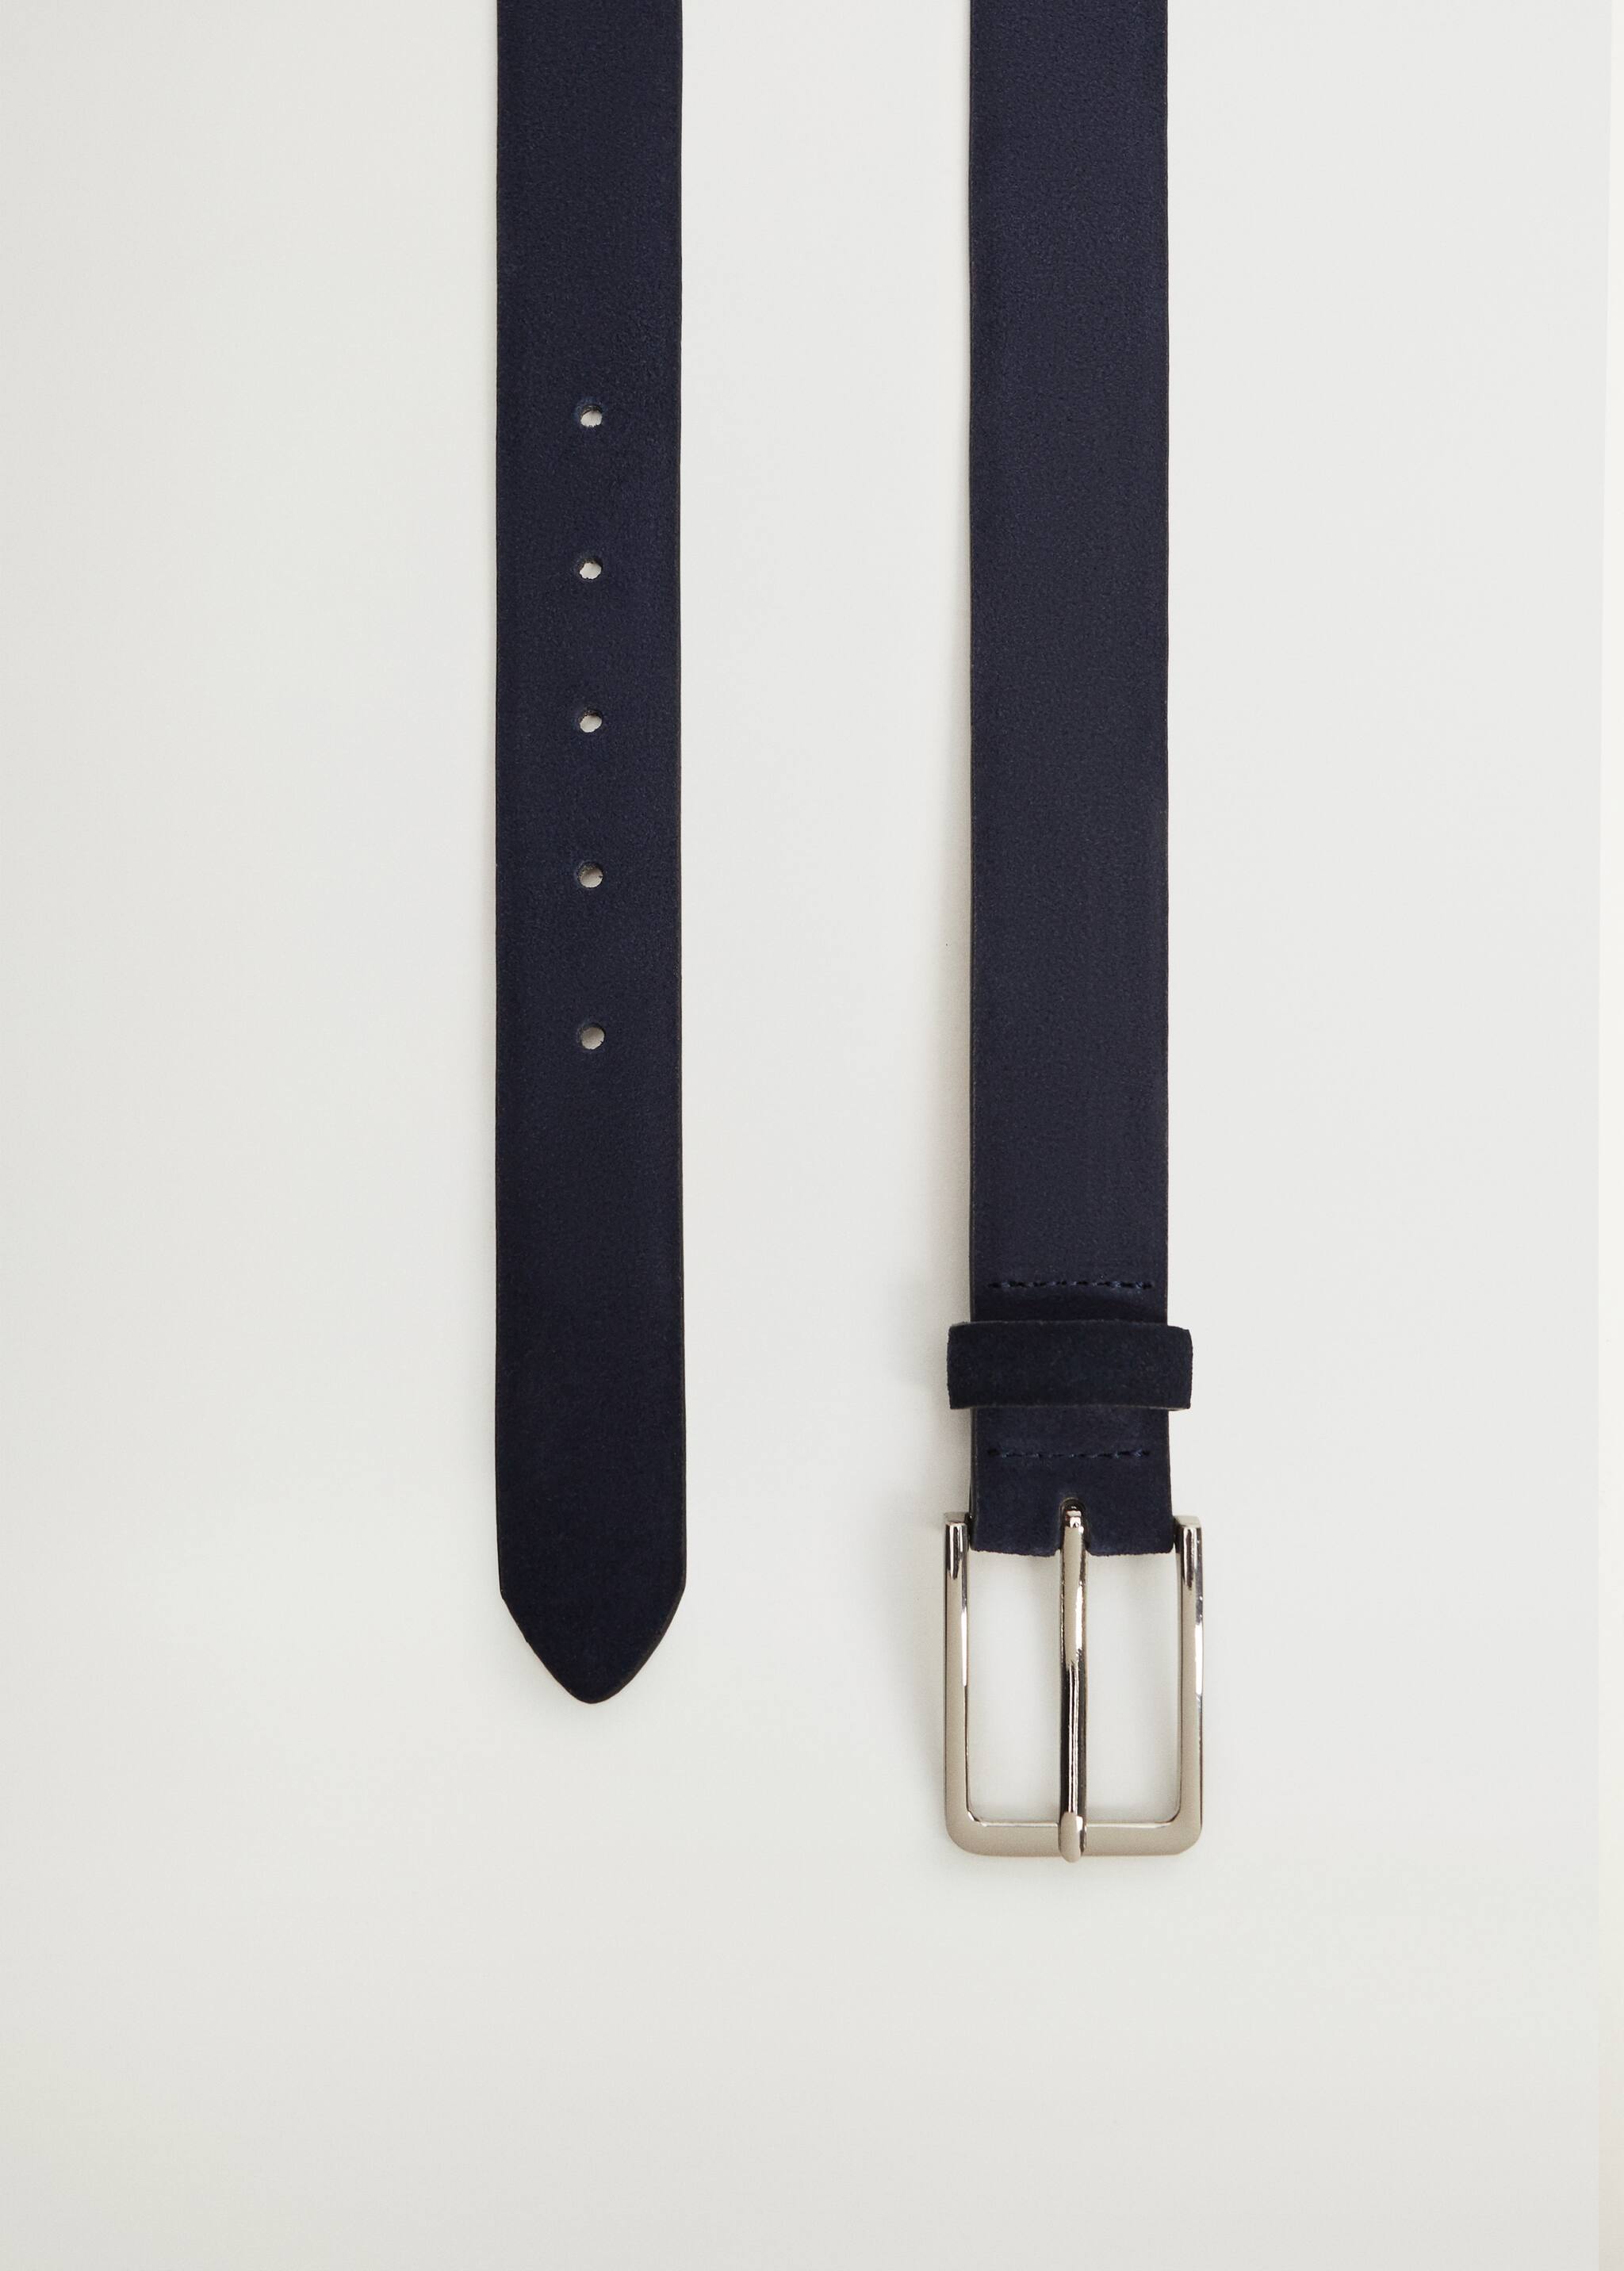 Suede belt - Details of the article 3